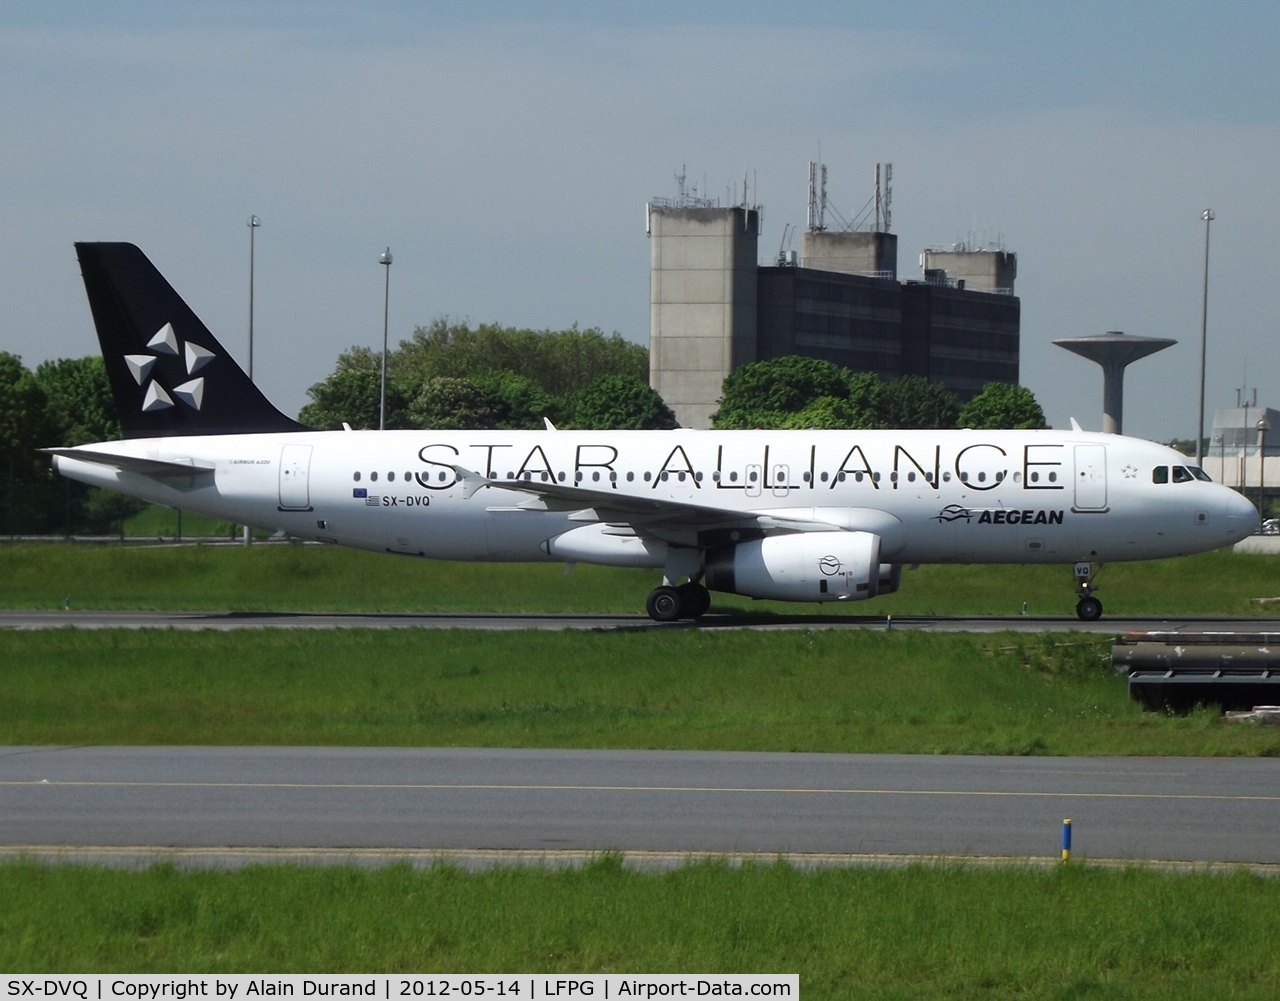 SX-DVQ, 2008 Airbus A320-232 C/N 3526, Ferried 2008-06-24 on delivery flight from XFW to ATH and painted in Star Alliance livery almost two year later.